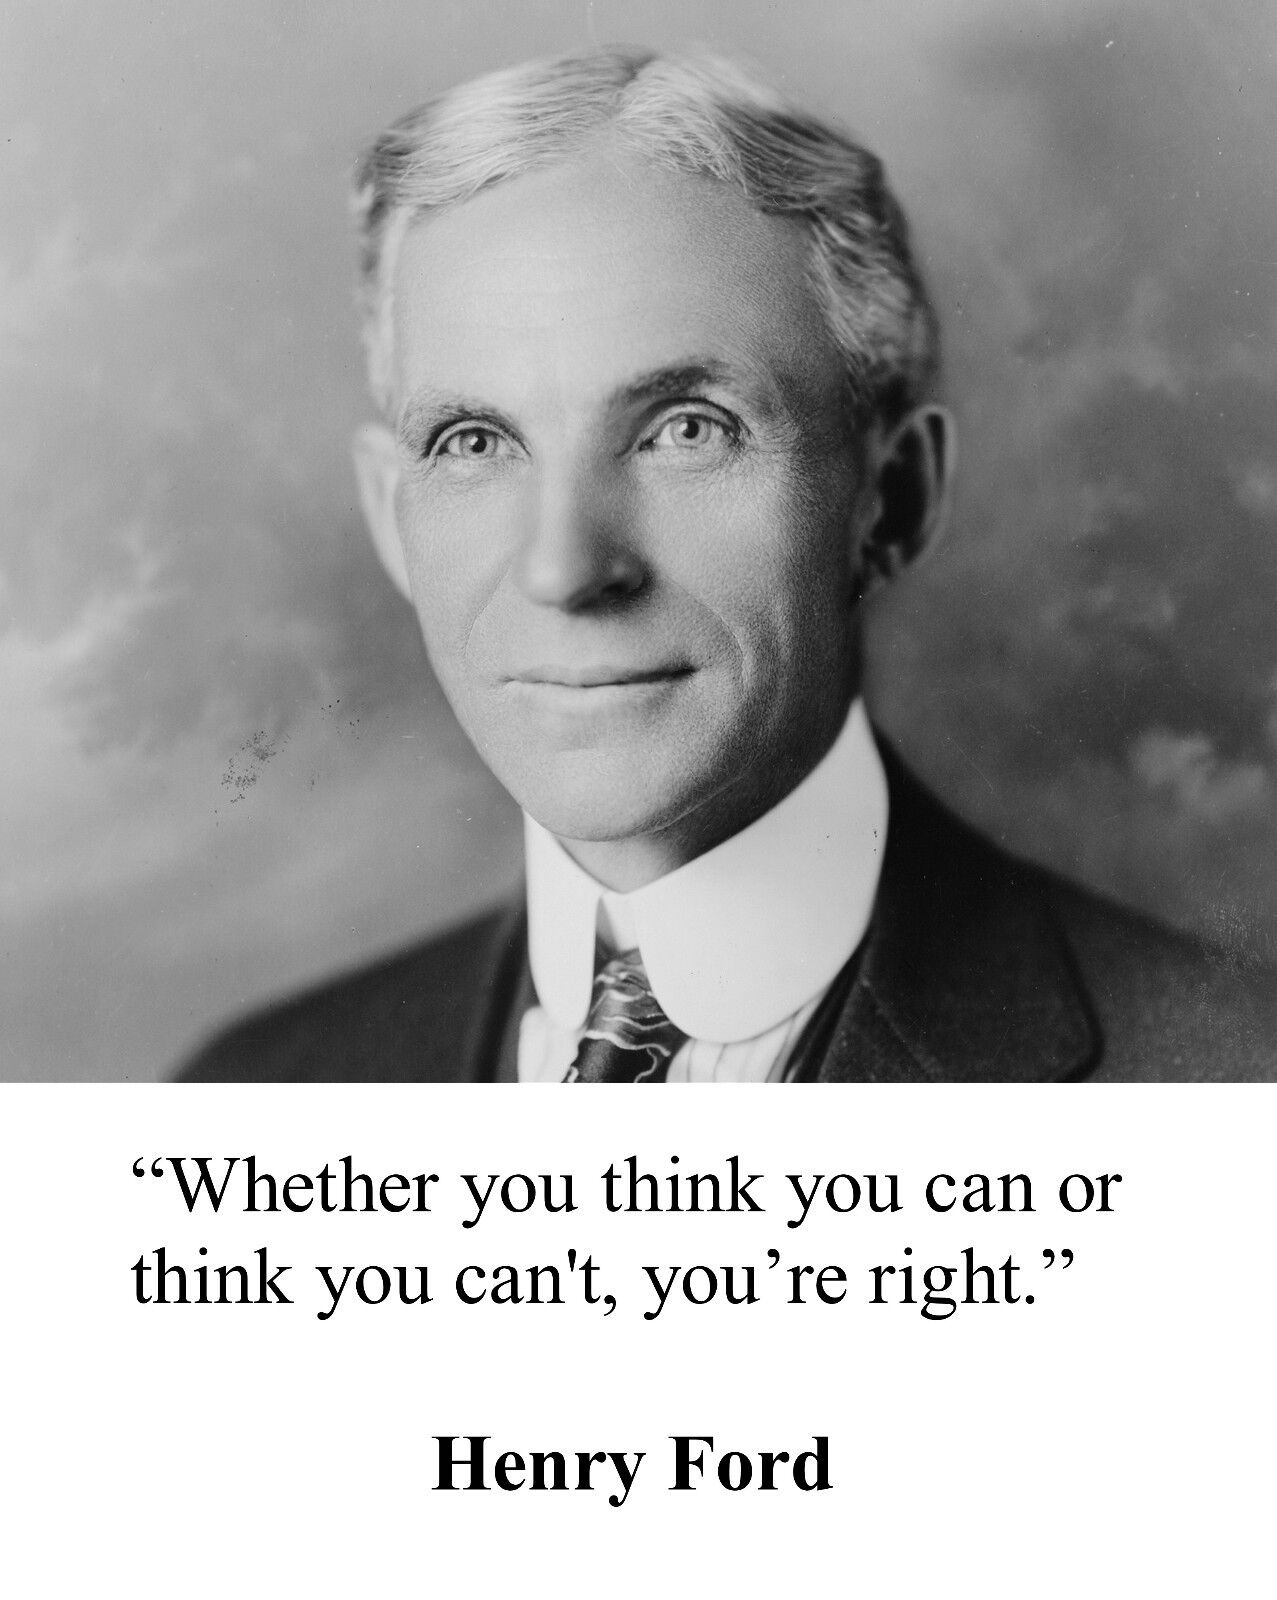 Henry Ford  Quote 8 x 10 Photo Picture #h1